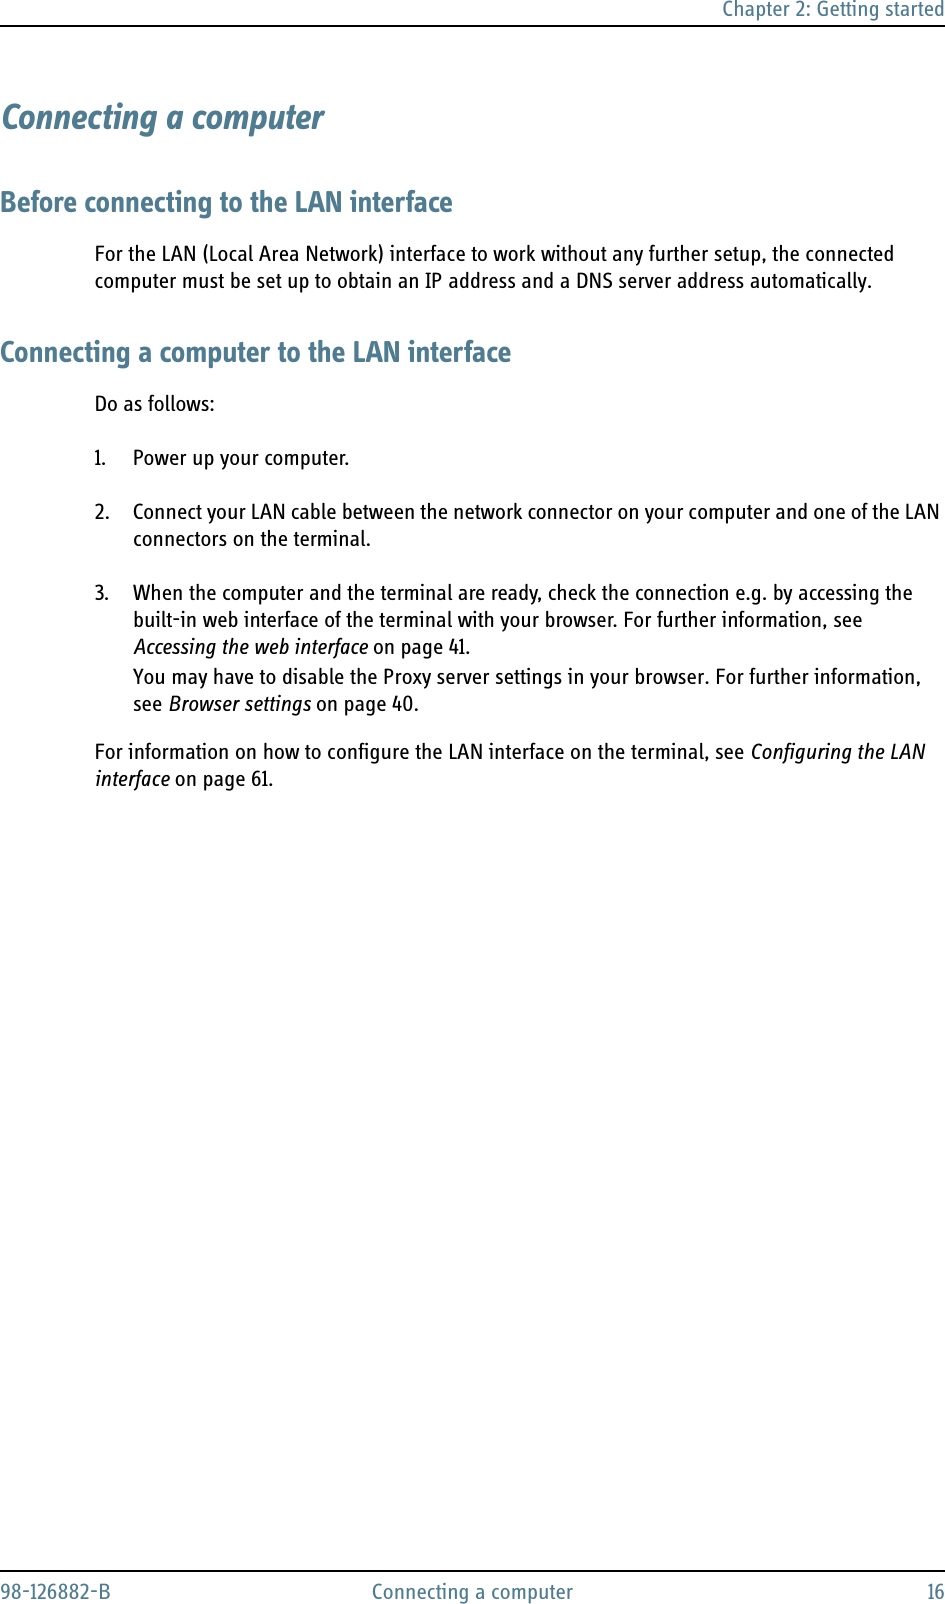 Chapter 2: Getting started98-126882-B Connecting a computer 16Connecting a computerBefore connecting to the LAN interfaceFor the LAN (Local Area Network) interface to work without any further setup, the connected computer must be set up to obtain an IP address and a DNS server address automatically. Connecting a computer to the LAN interfaceDo as follows:1. Power up your computer.2. Connect your LAN cable between the network connector on your computer and one of the LAN connectors on the terminal.3. When the computer and the terminal are ready, check the connection e.g. by accessing the built-in web interface of the terminal with your browser. For further information, see Accessing the web interface on page 41.You may have to disable the Proxy server settings in your browser. For further information, see Browser settings on page 40.For information on how to configure the LAN interface on the terminal, see Configuring the LAN interface on page 61.